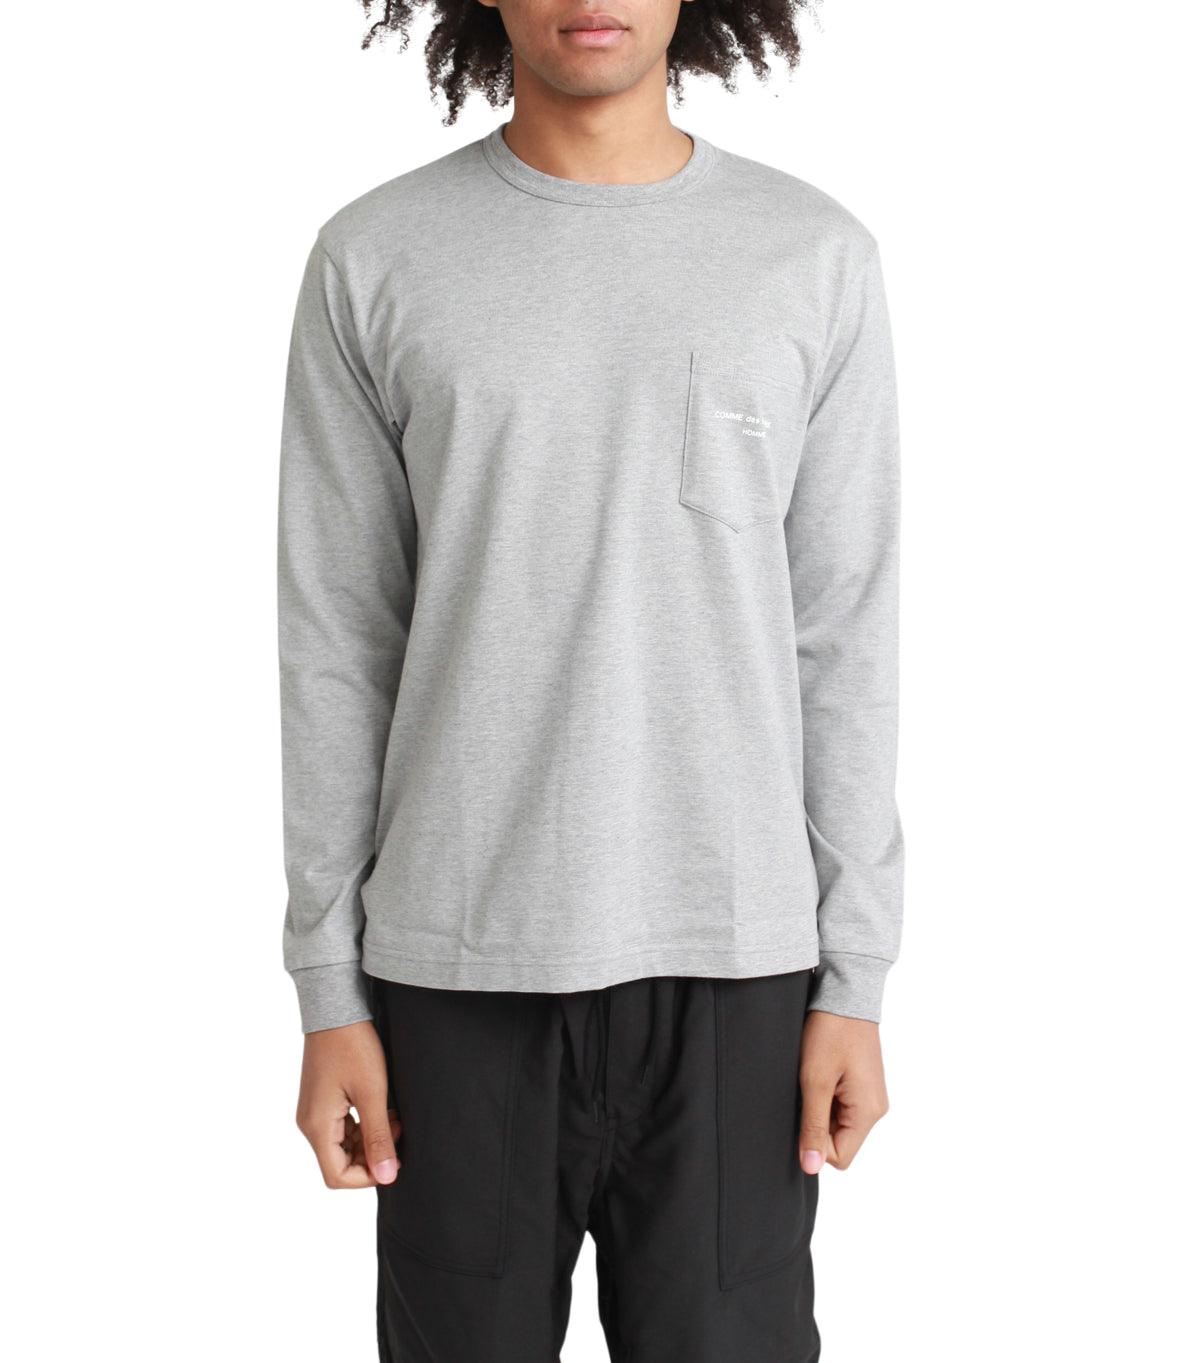 CdG Homme Pocket T-Shirt Long Sleeve Top Gray | SOMEWHERE